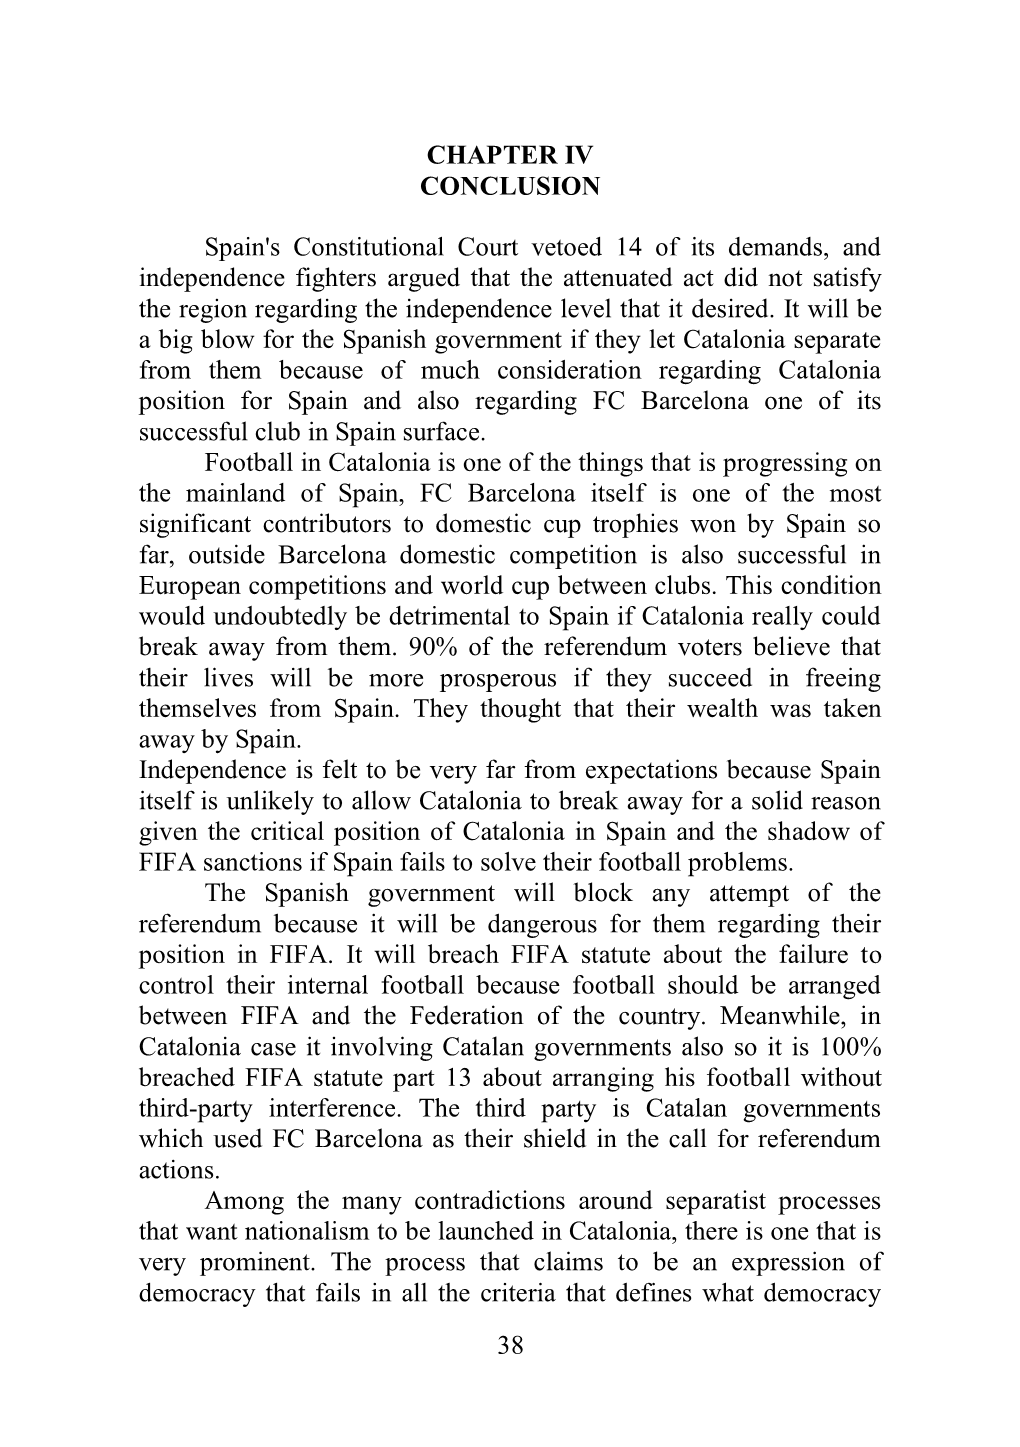 38 CHAPTER IV CONCLUSION Spain's Constitutional Court Vetoed